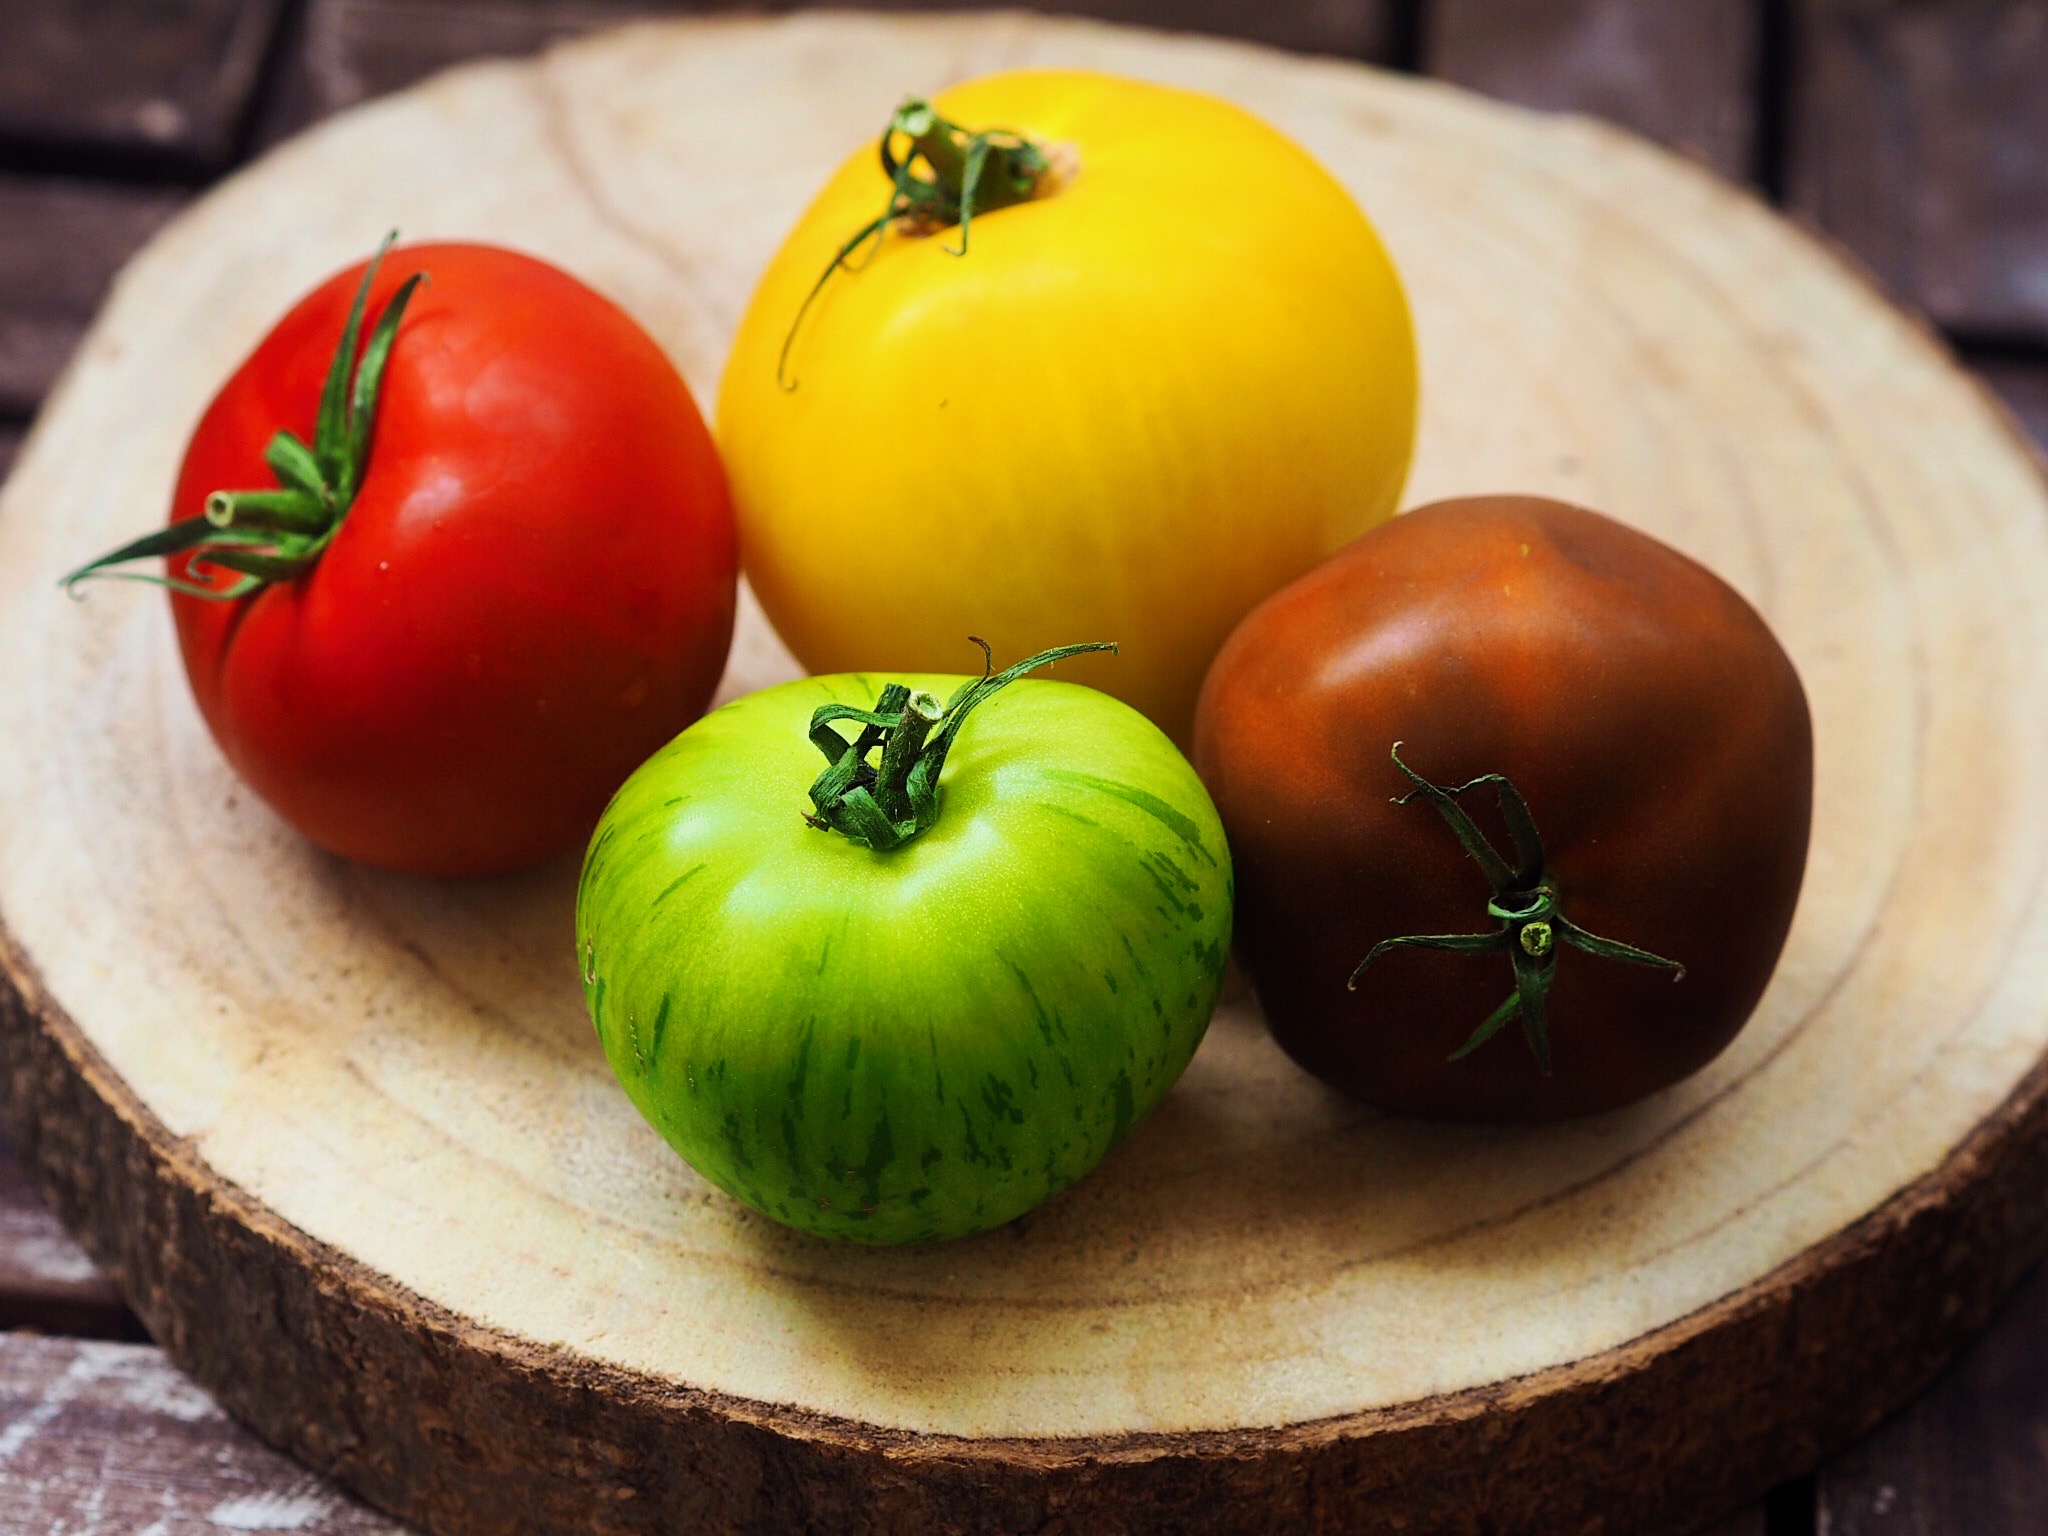 Multicolored French tomatoes